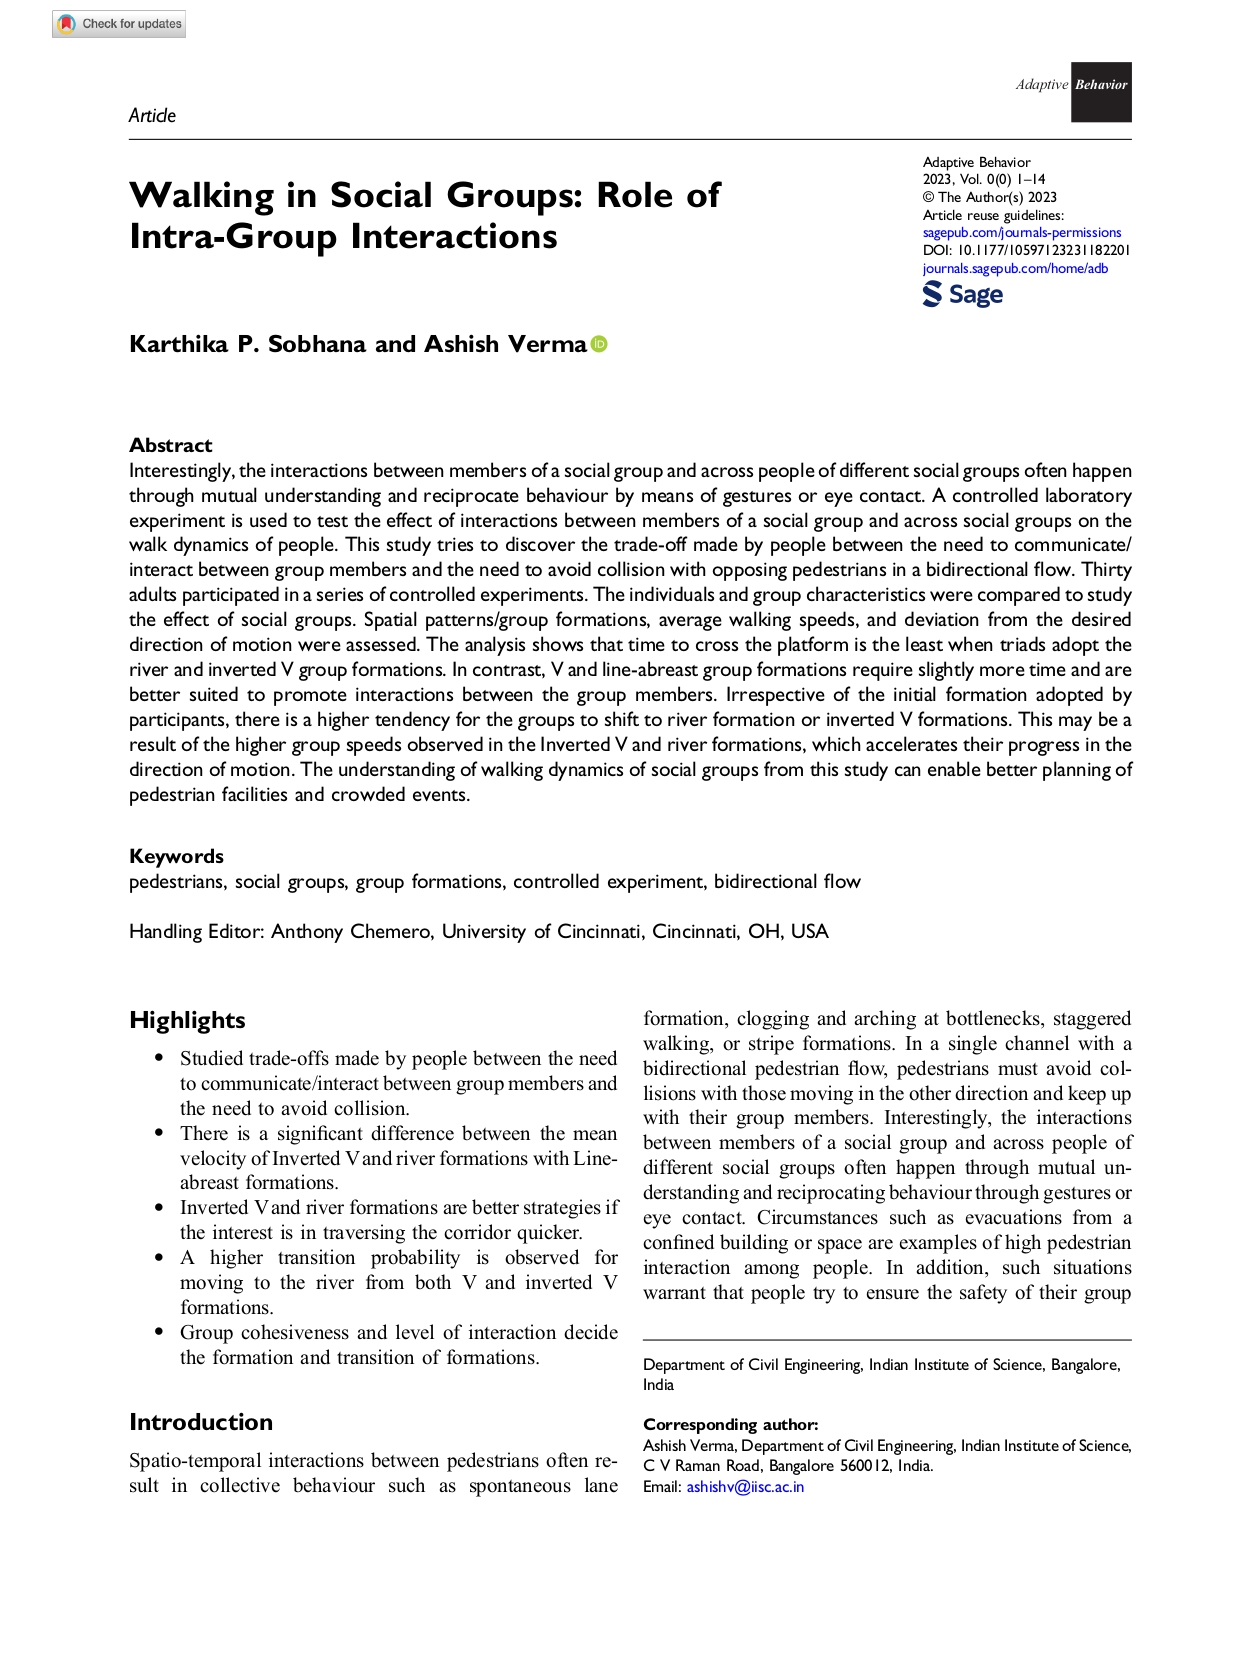 Walking in Social Groups: Role of Intra-Group Interactions